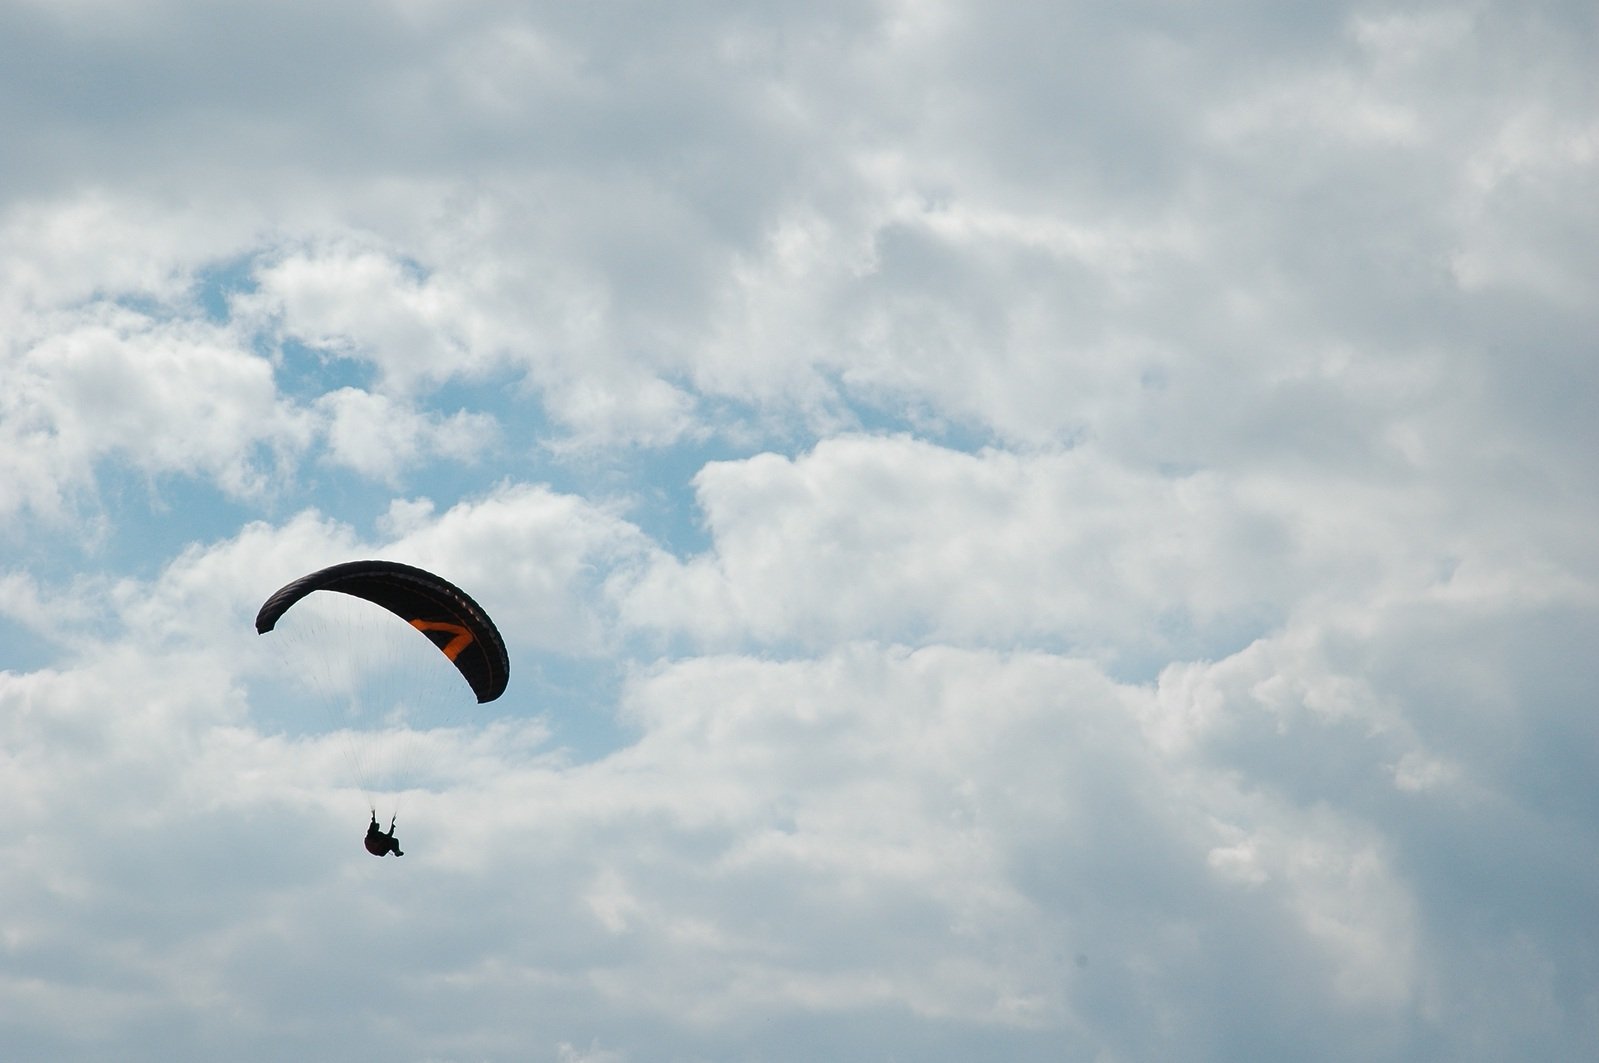 two people in the middle of a big sky with kites in it